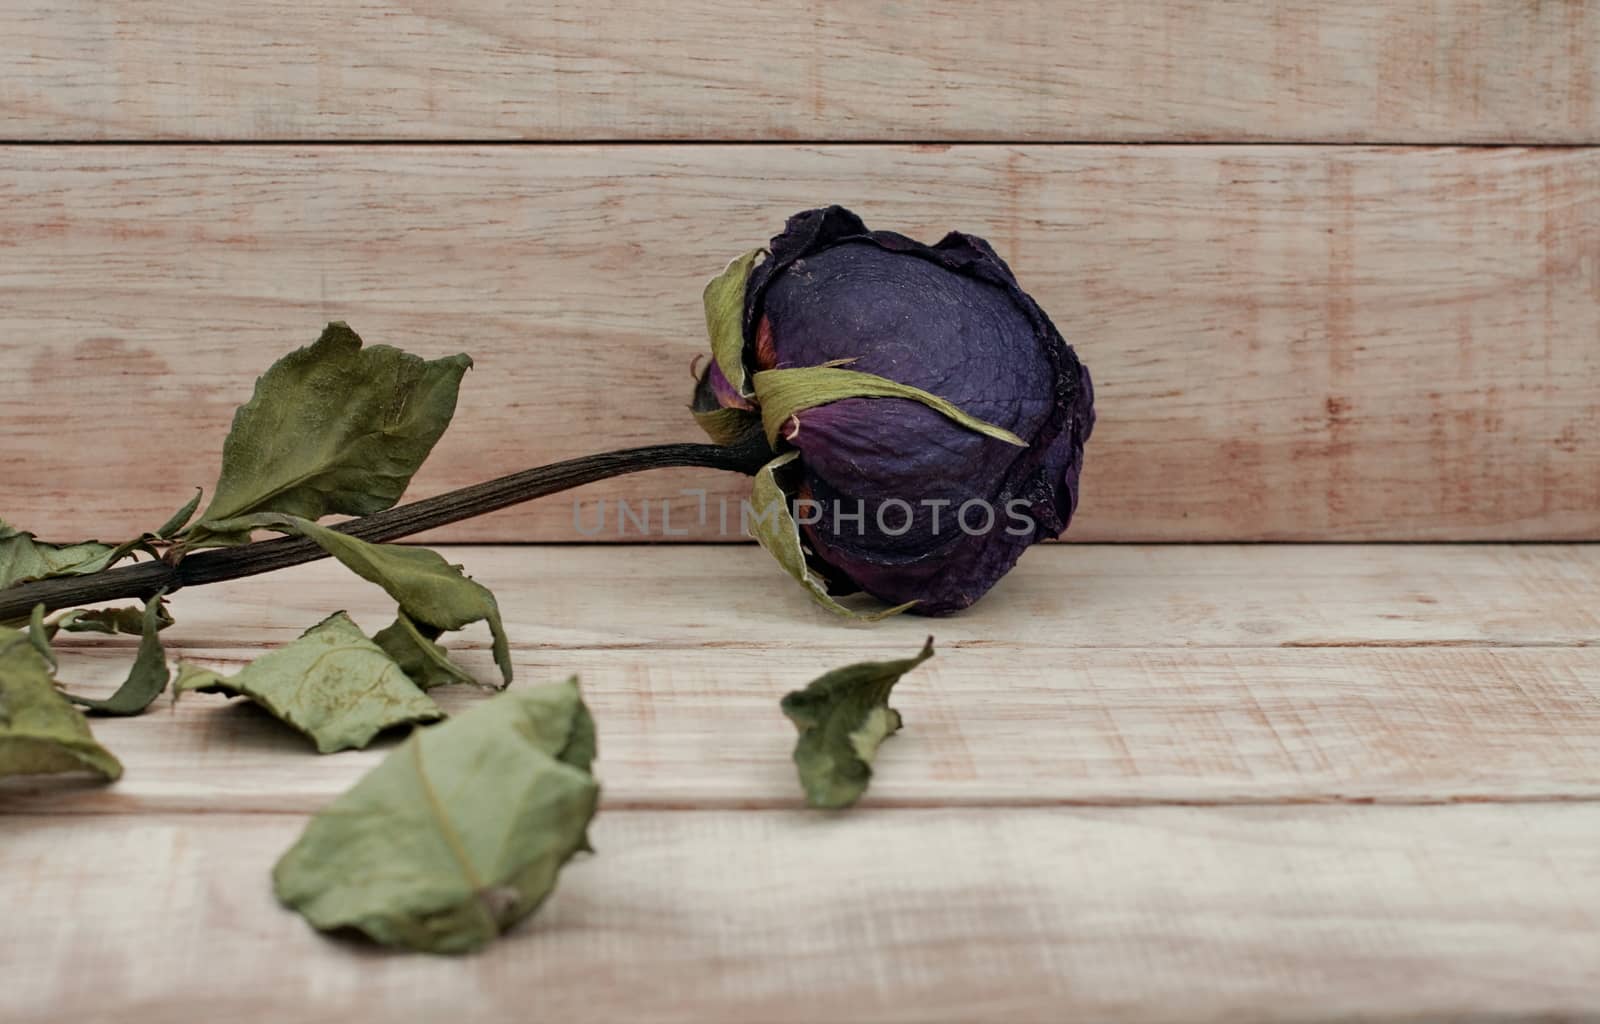 Dry roses on wood pattern background. Fill color effect in white balance changed to pink color.